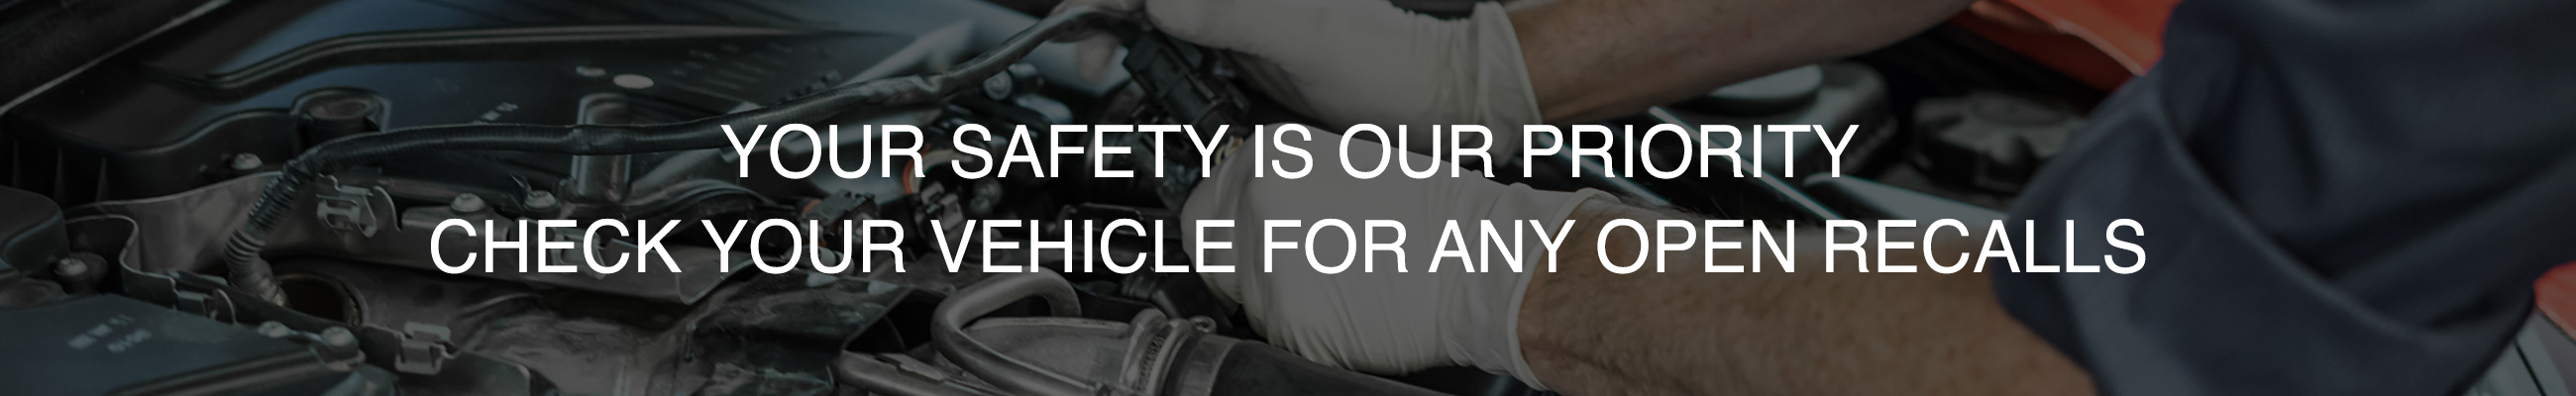 YOUR SAFETY IS OUR PRIORITY! CHECK YOUR VEHICLE FOR OPEN RECALLS